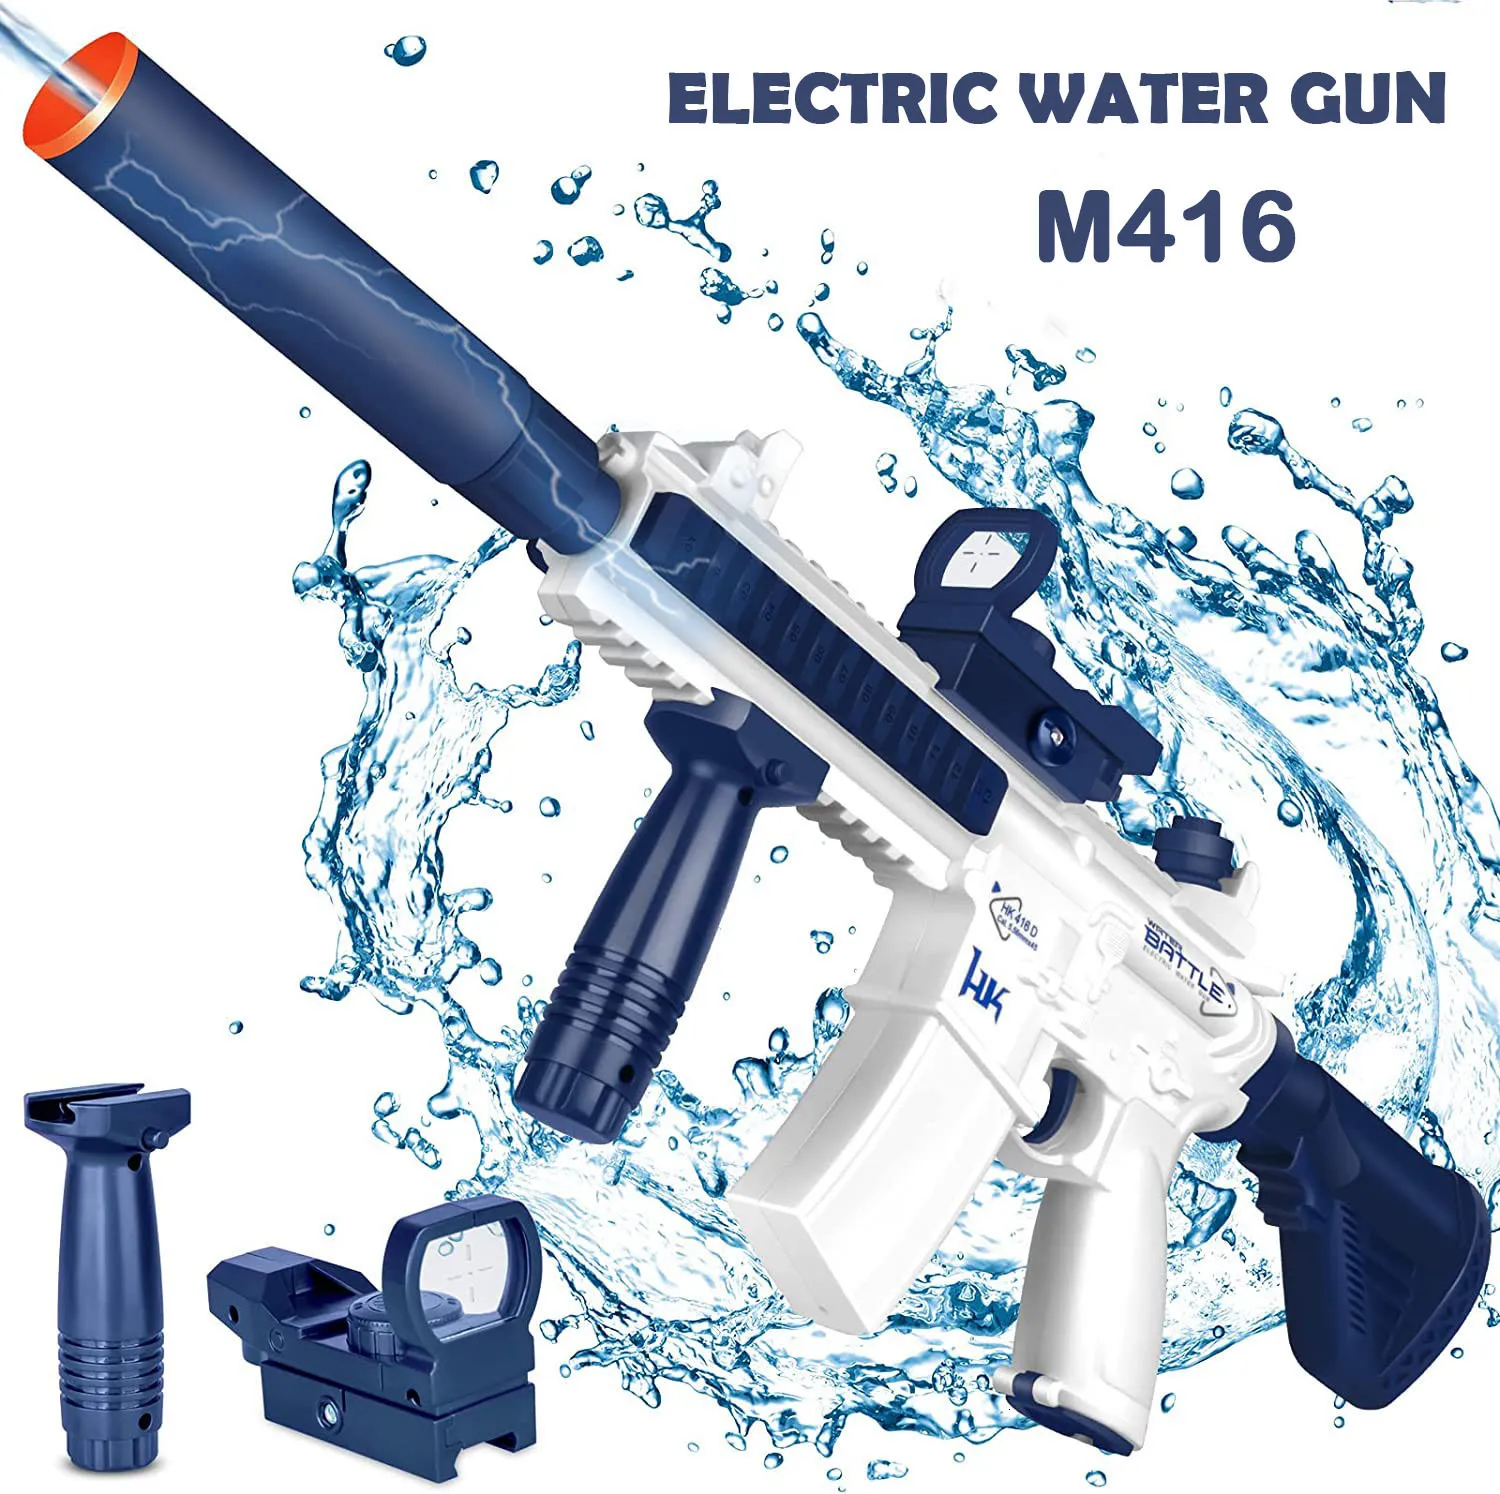 Plack Play Water Fun Electric Toy M416 Super automatyczne pistolety Glock Swimming Basen Beach Party Game Outdoor Walka na dzieci